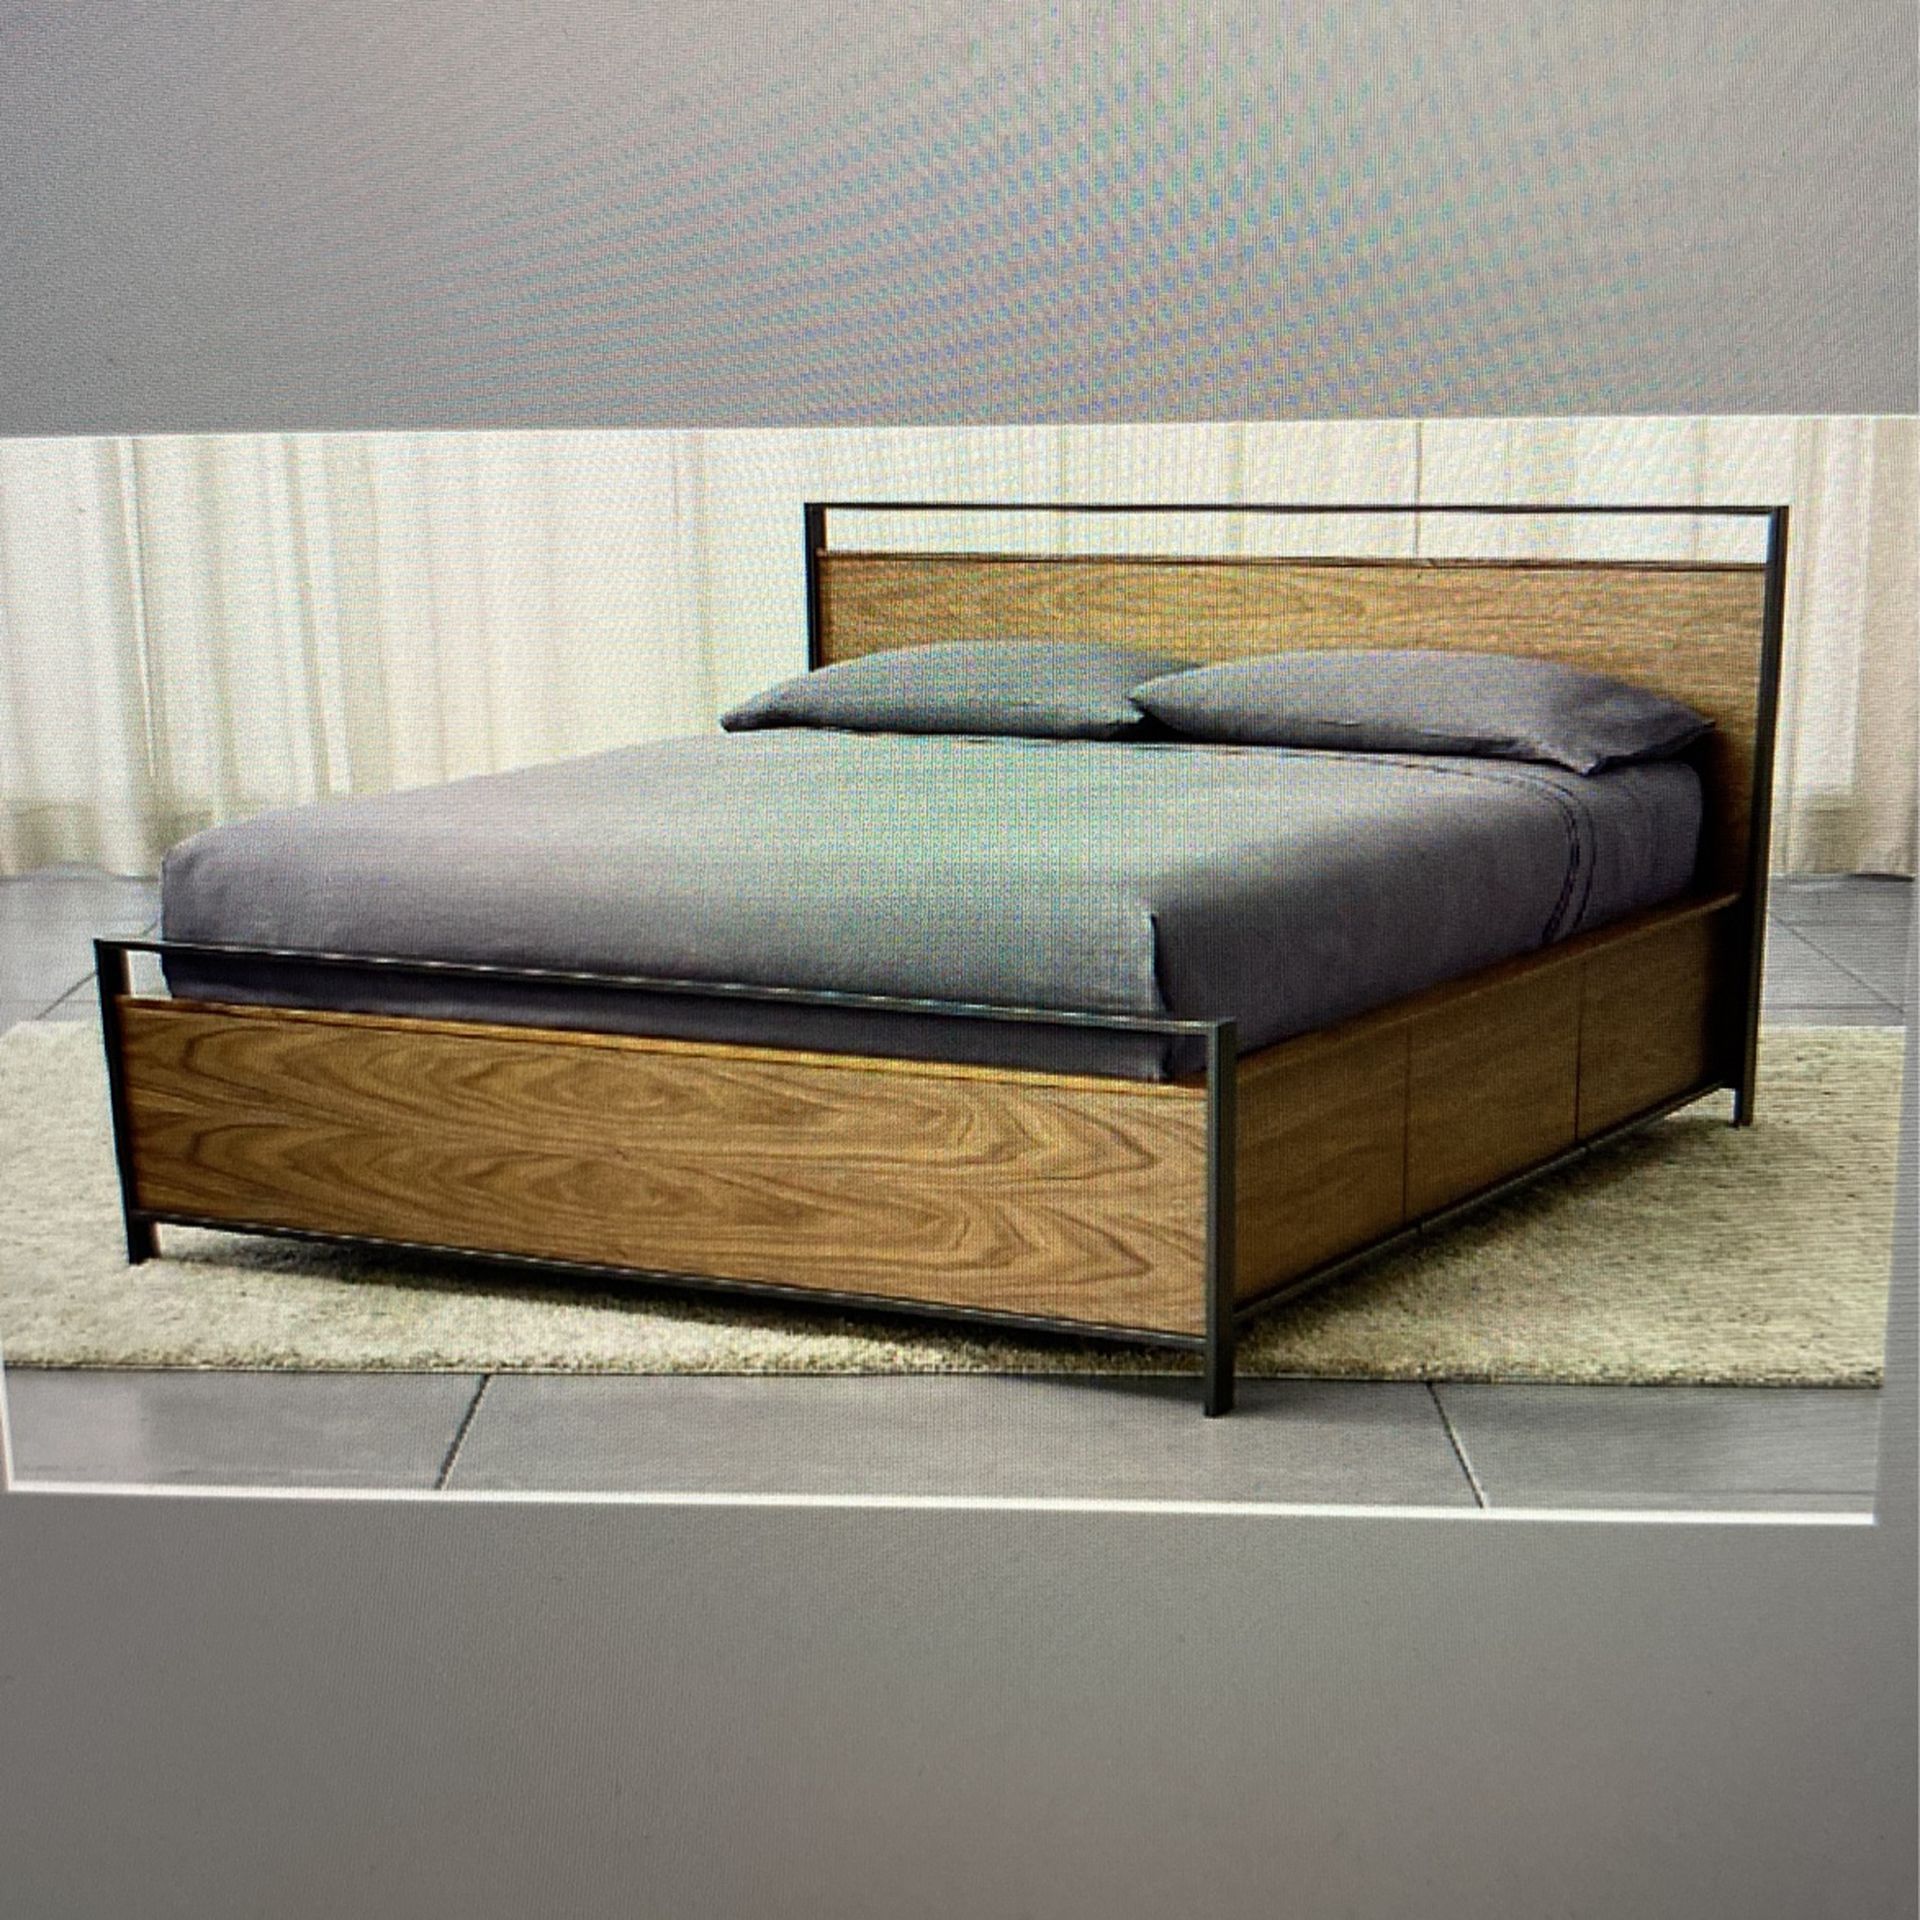 Crate and Barrel Bowery Queen Platform Storage Bed